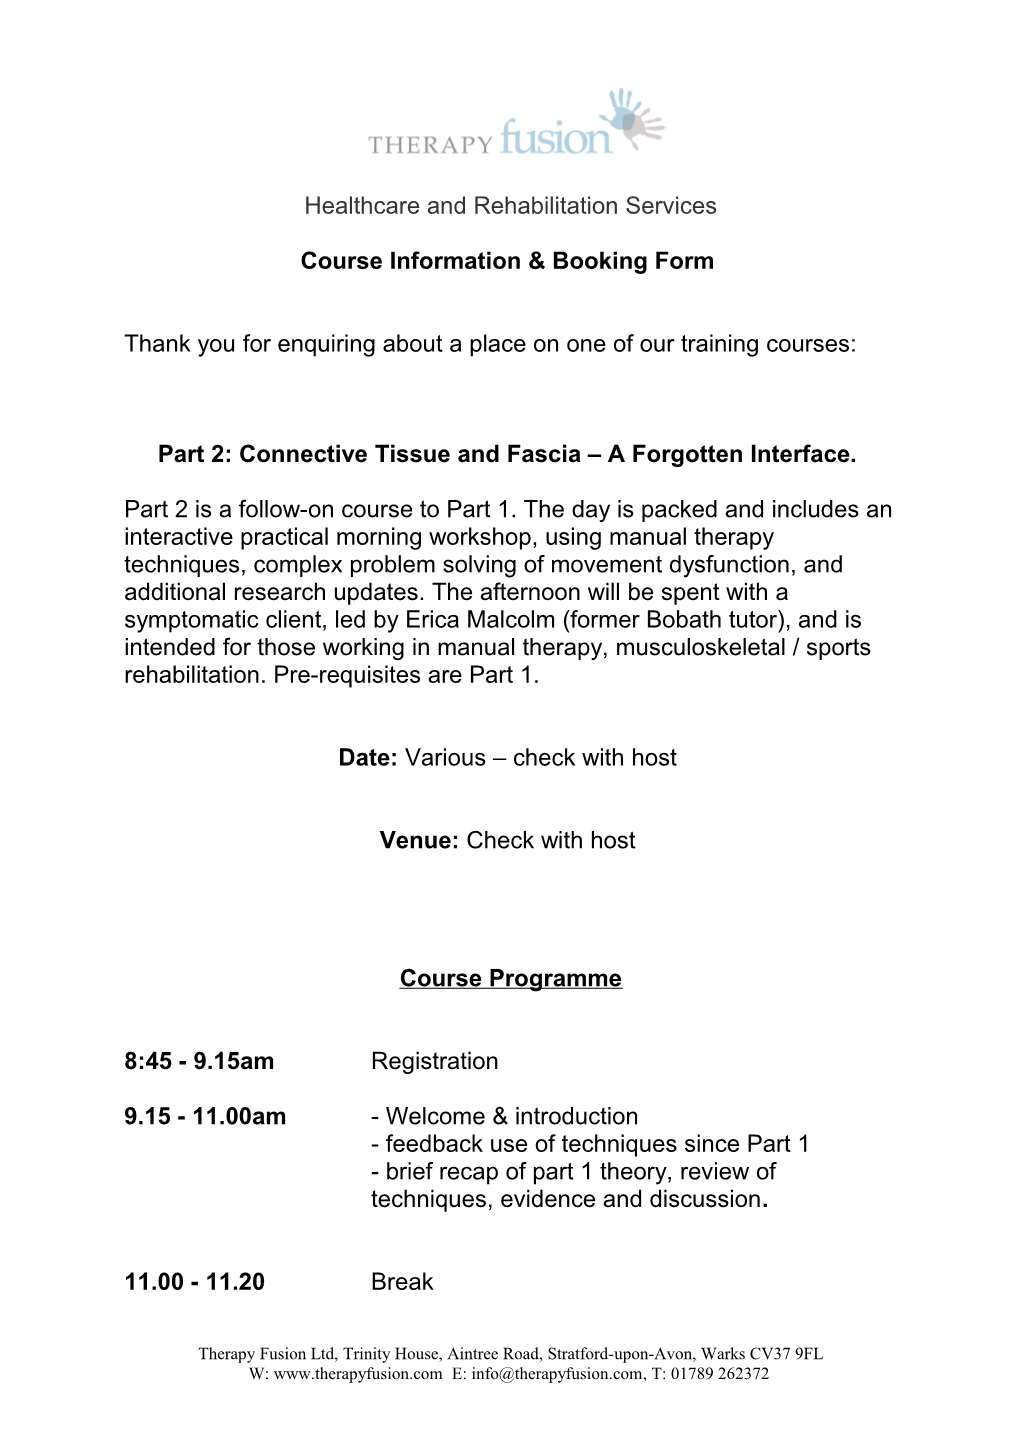 Course Information & Booking Form